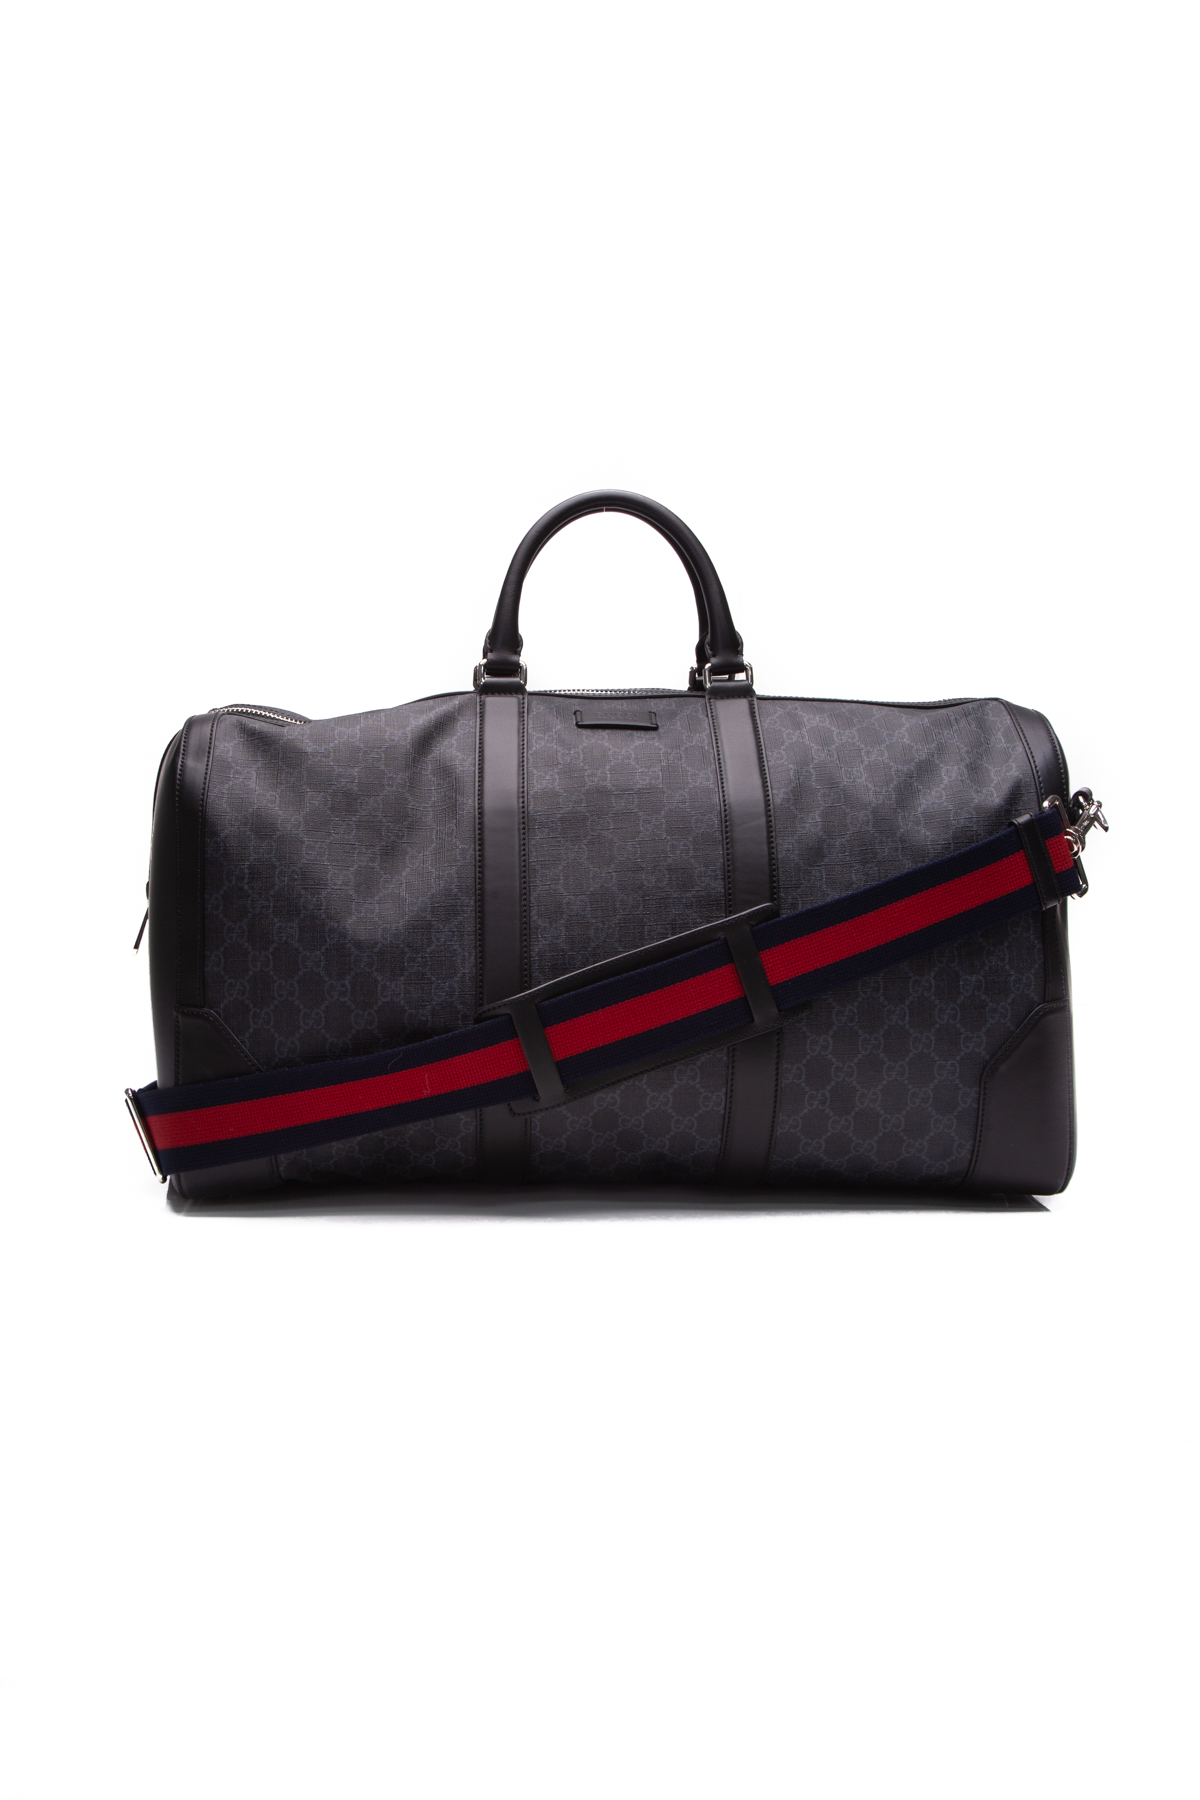 GG Black carry-on duffle